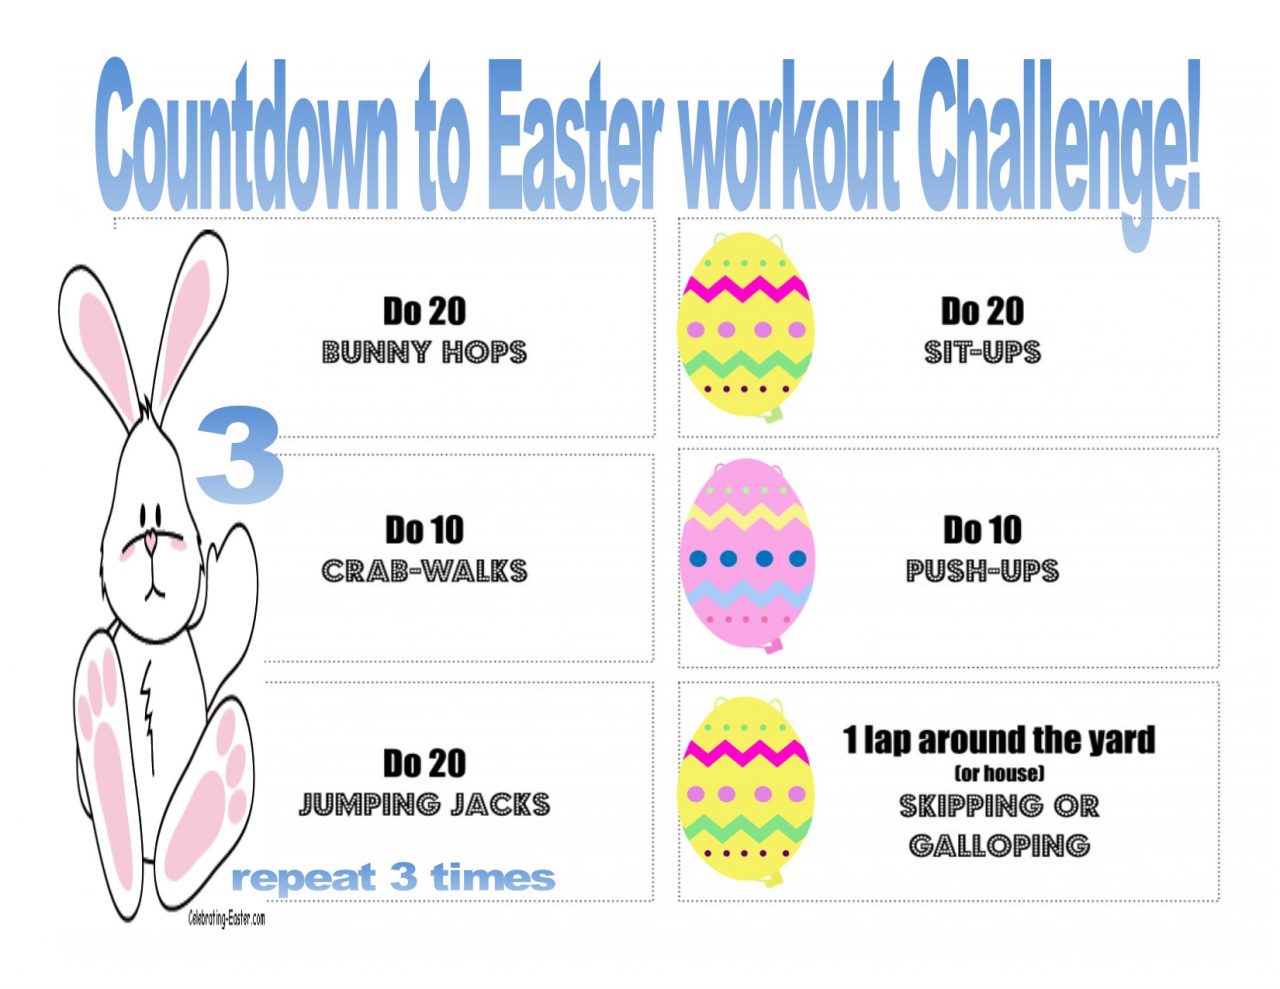 day-3-countdown-to-Easter-pg1-1280x989.jpg